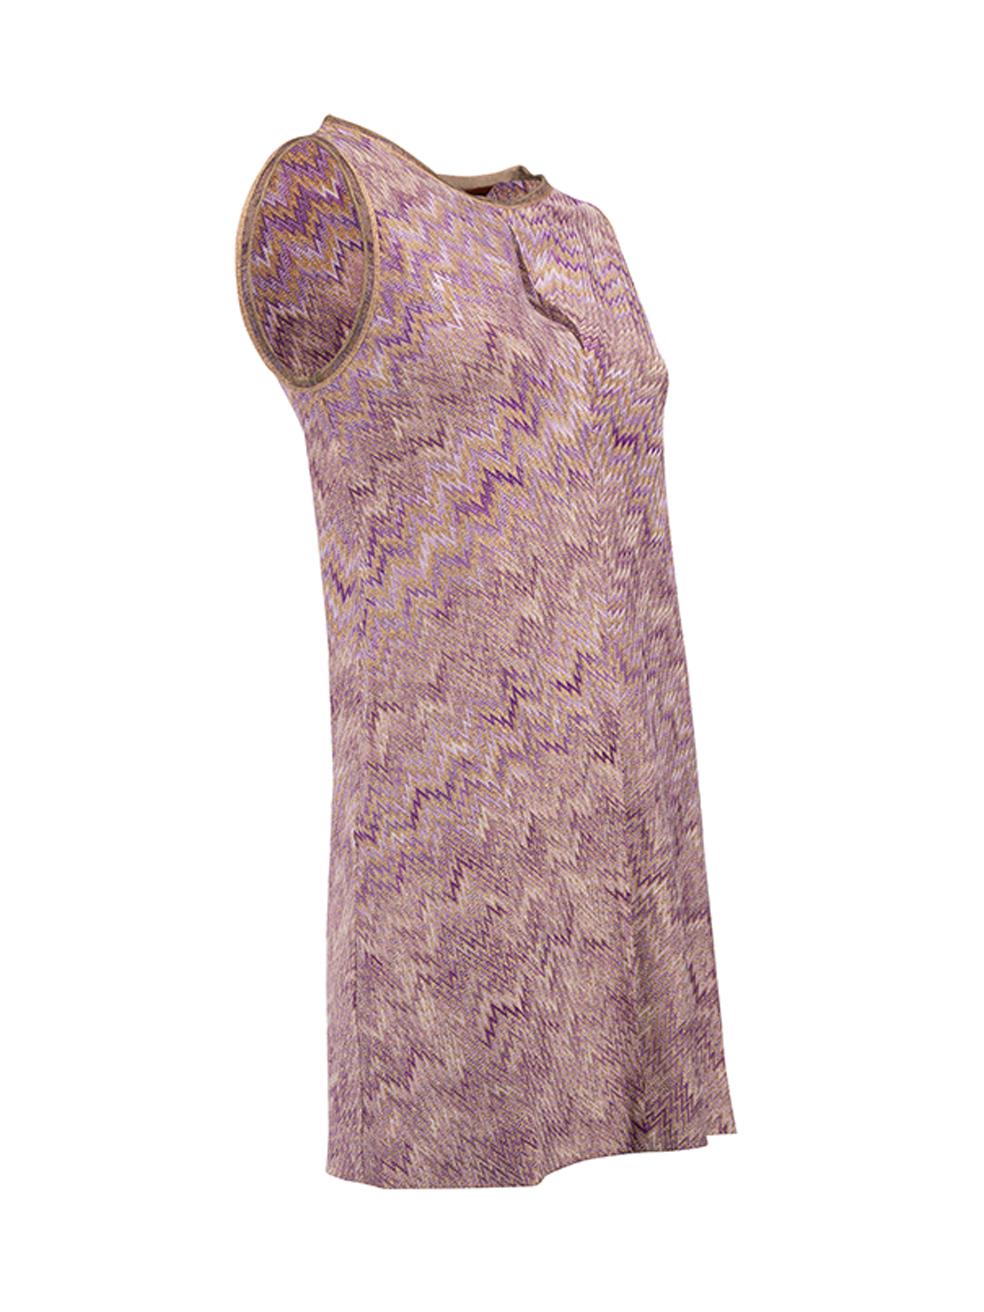 CONDITION is Never worn. No visible wear to dress is evident on this used Missoni designer resale item. Details Purple Synthetic Mini dress Abstract pattern Round neckline with slit design Sleeveless Made in Italy Composition NO COMPOSITION LABEL